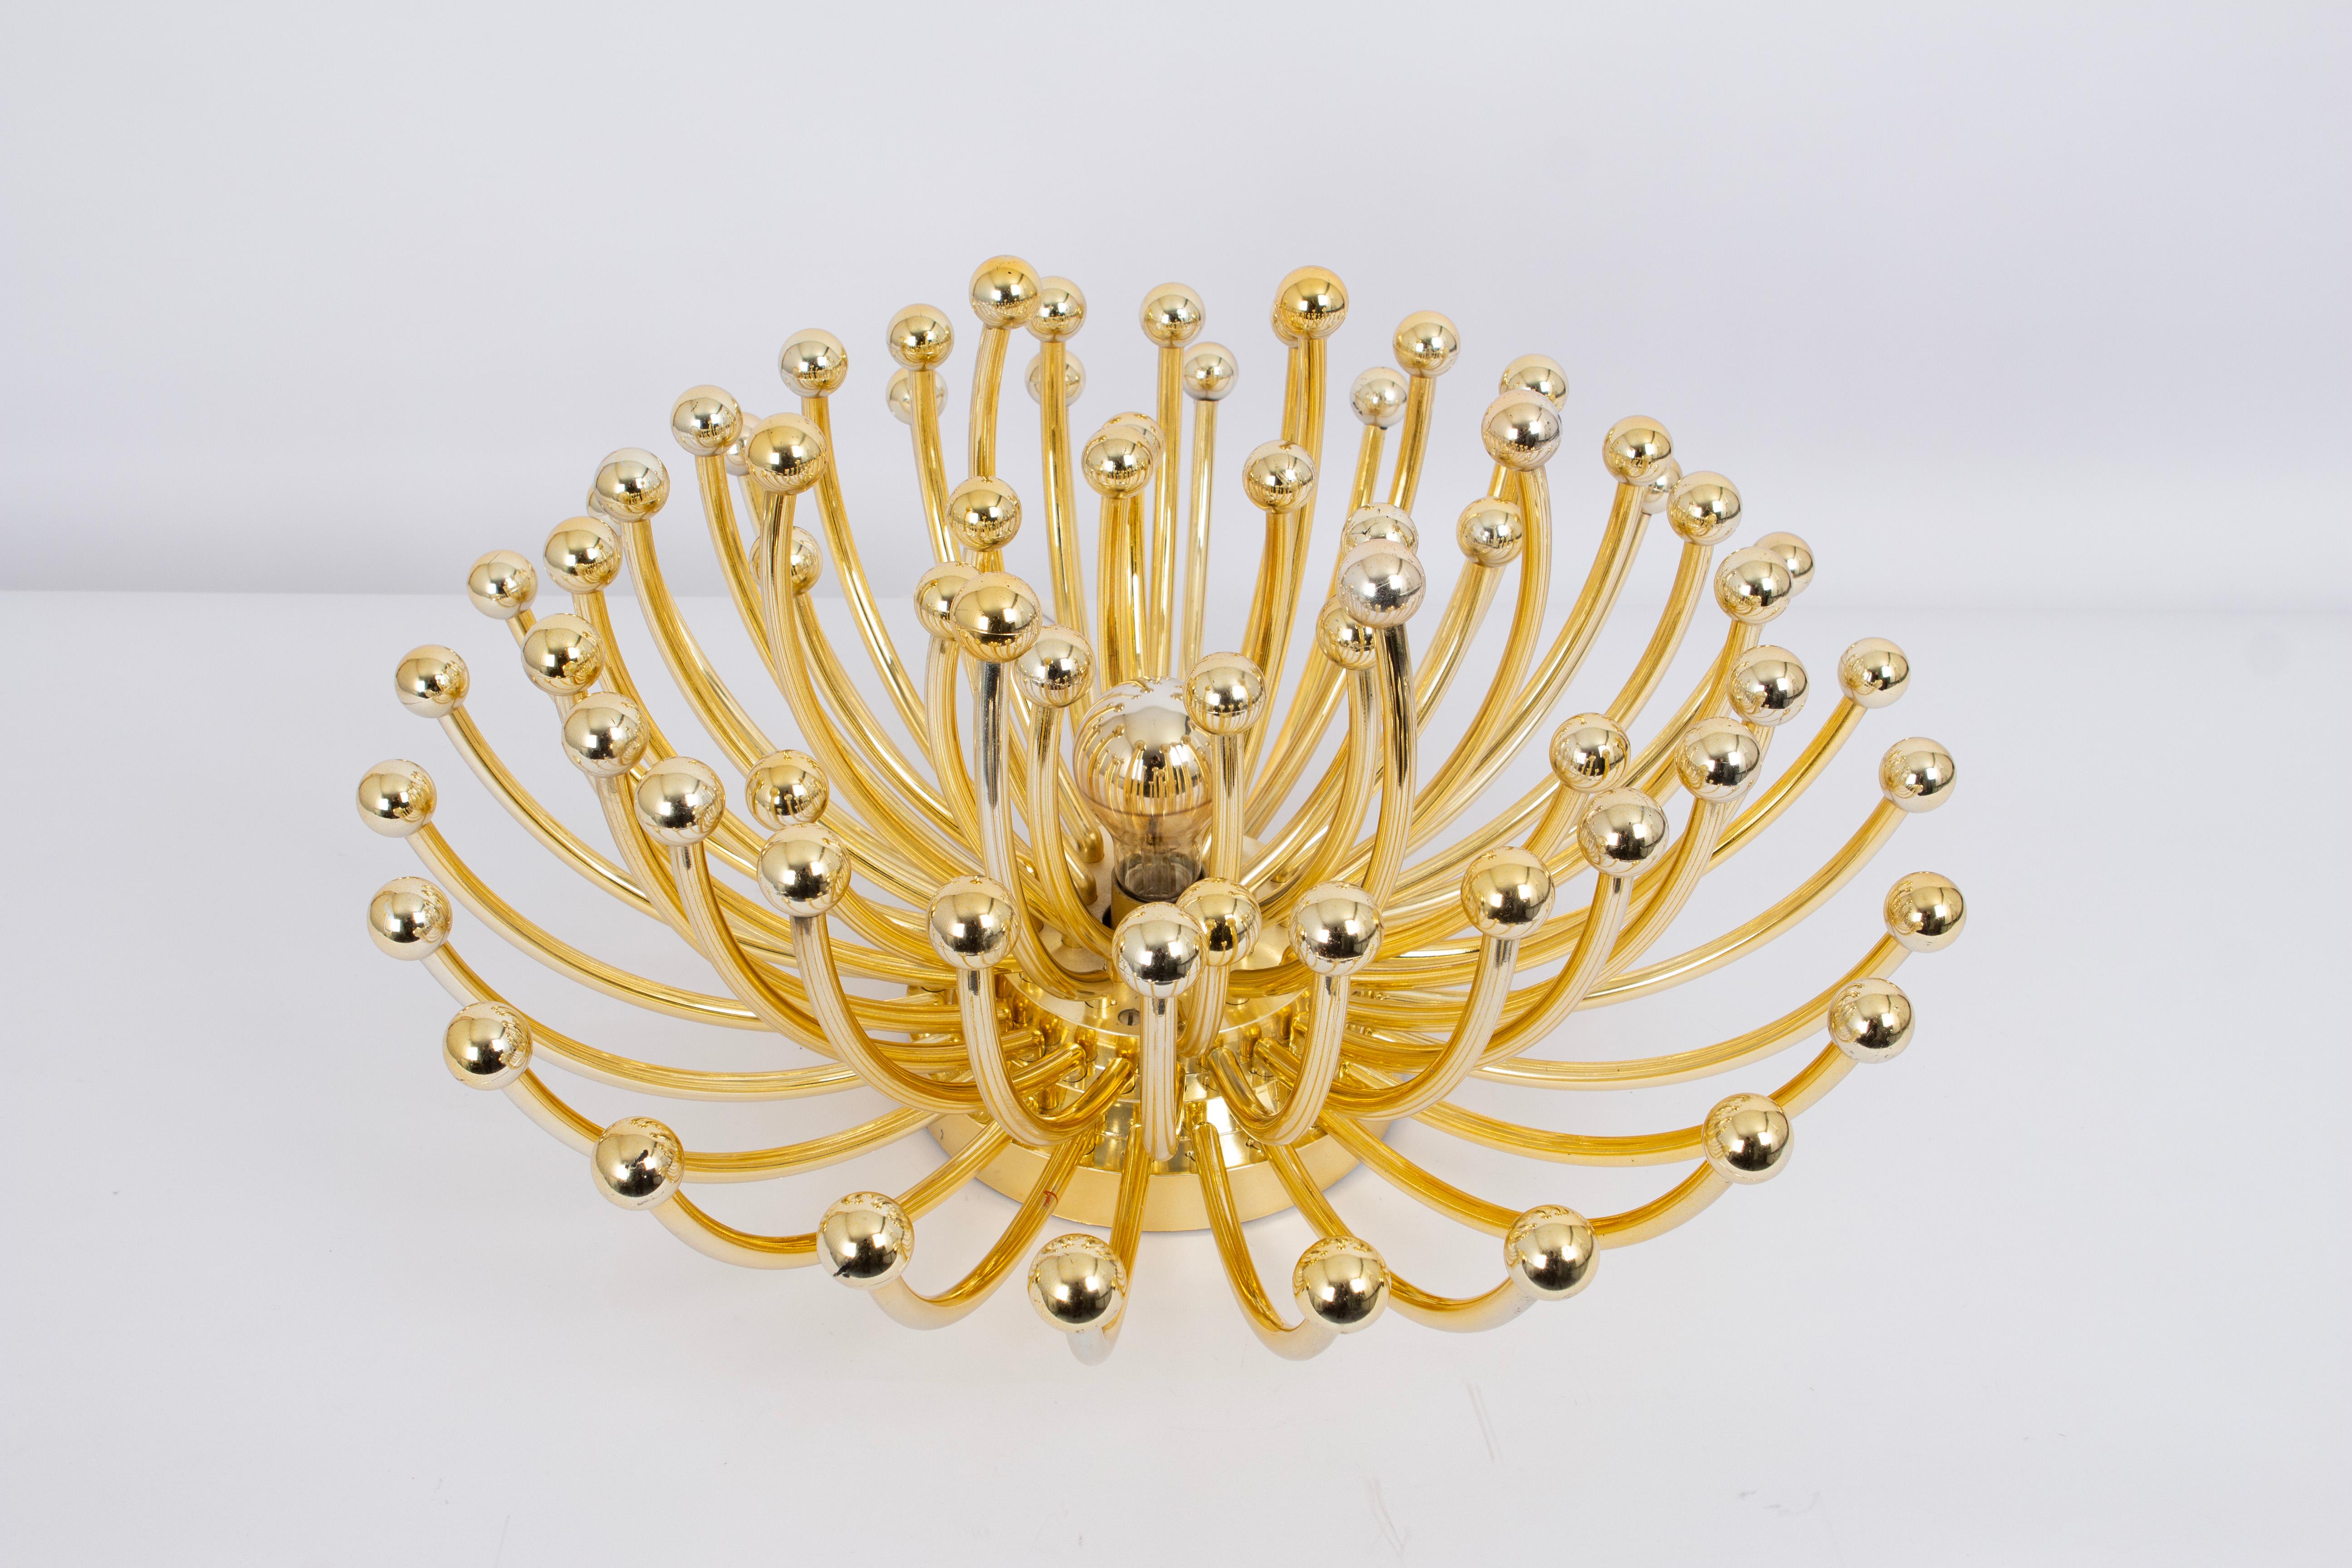 Large Pistillino Ceiling Light by Valenti Luce for Studio Tetrarch, 1970s For Sale 3